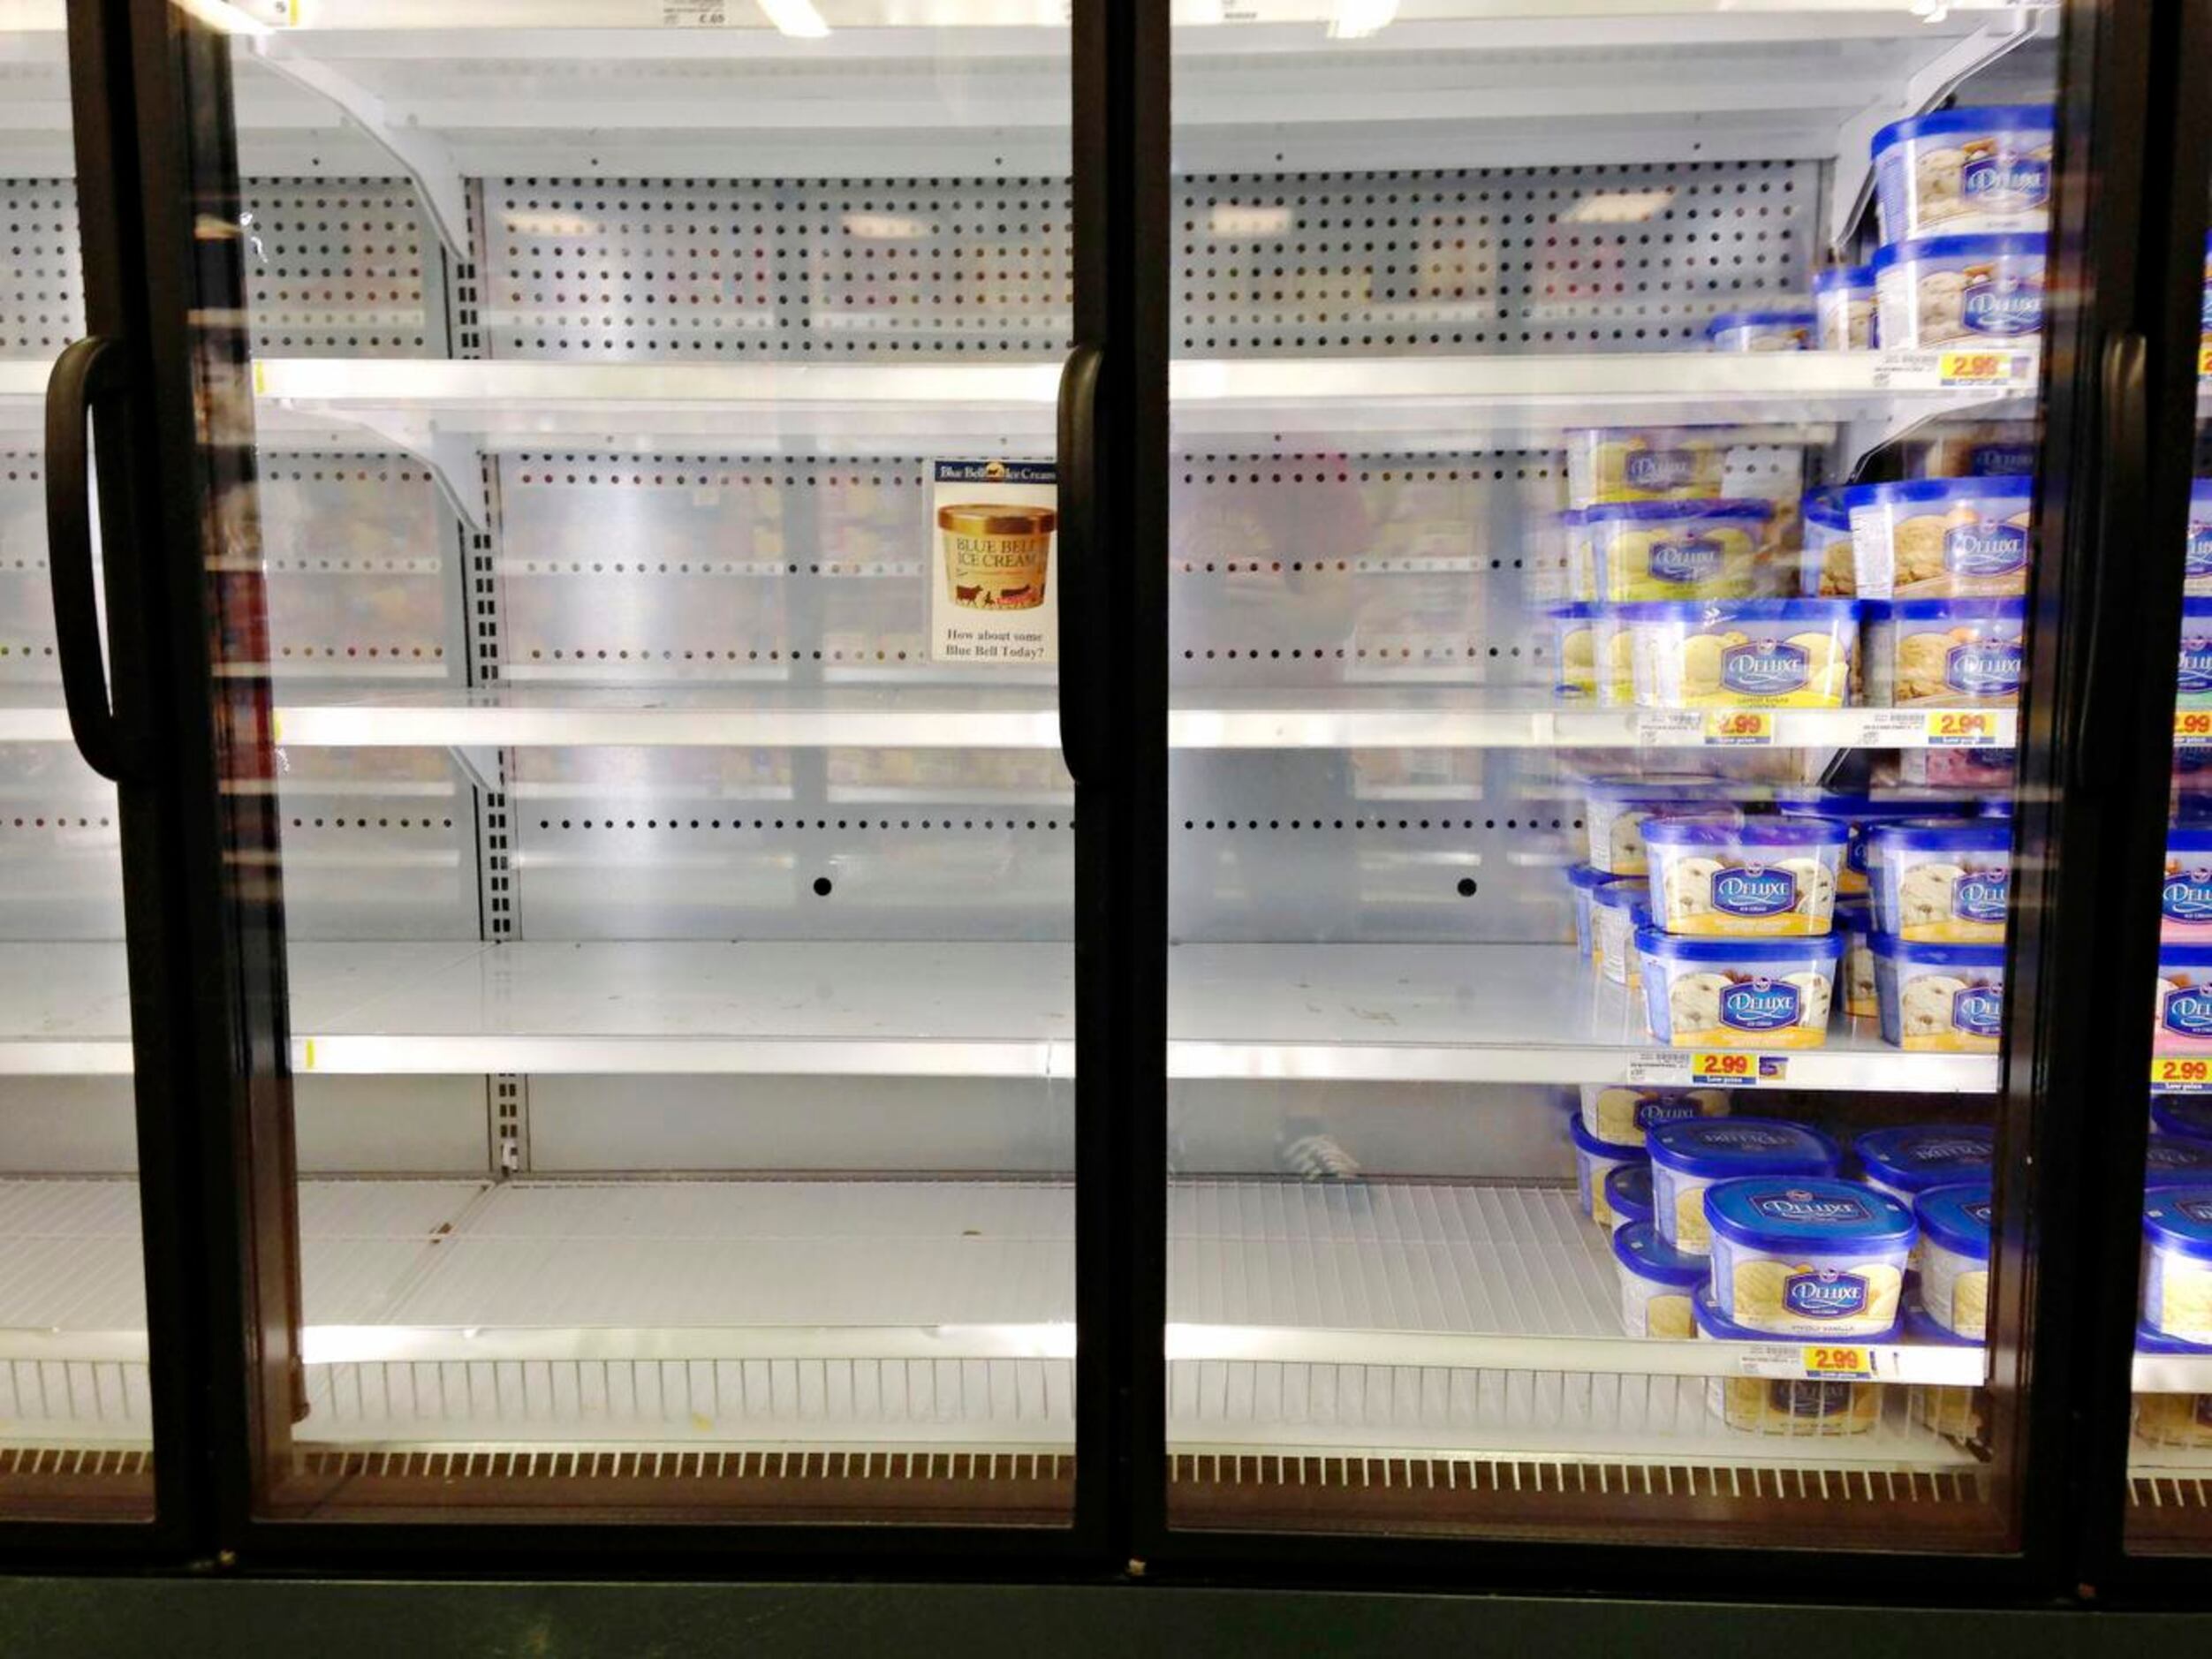 Neither agencies nor Blue Bell tested products for Listeria